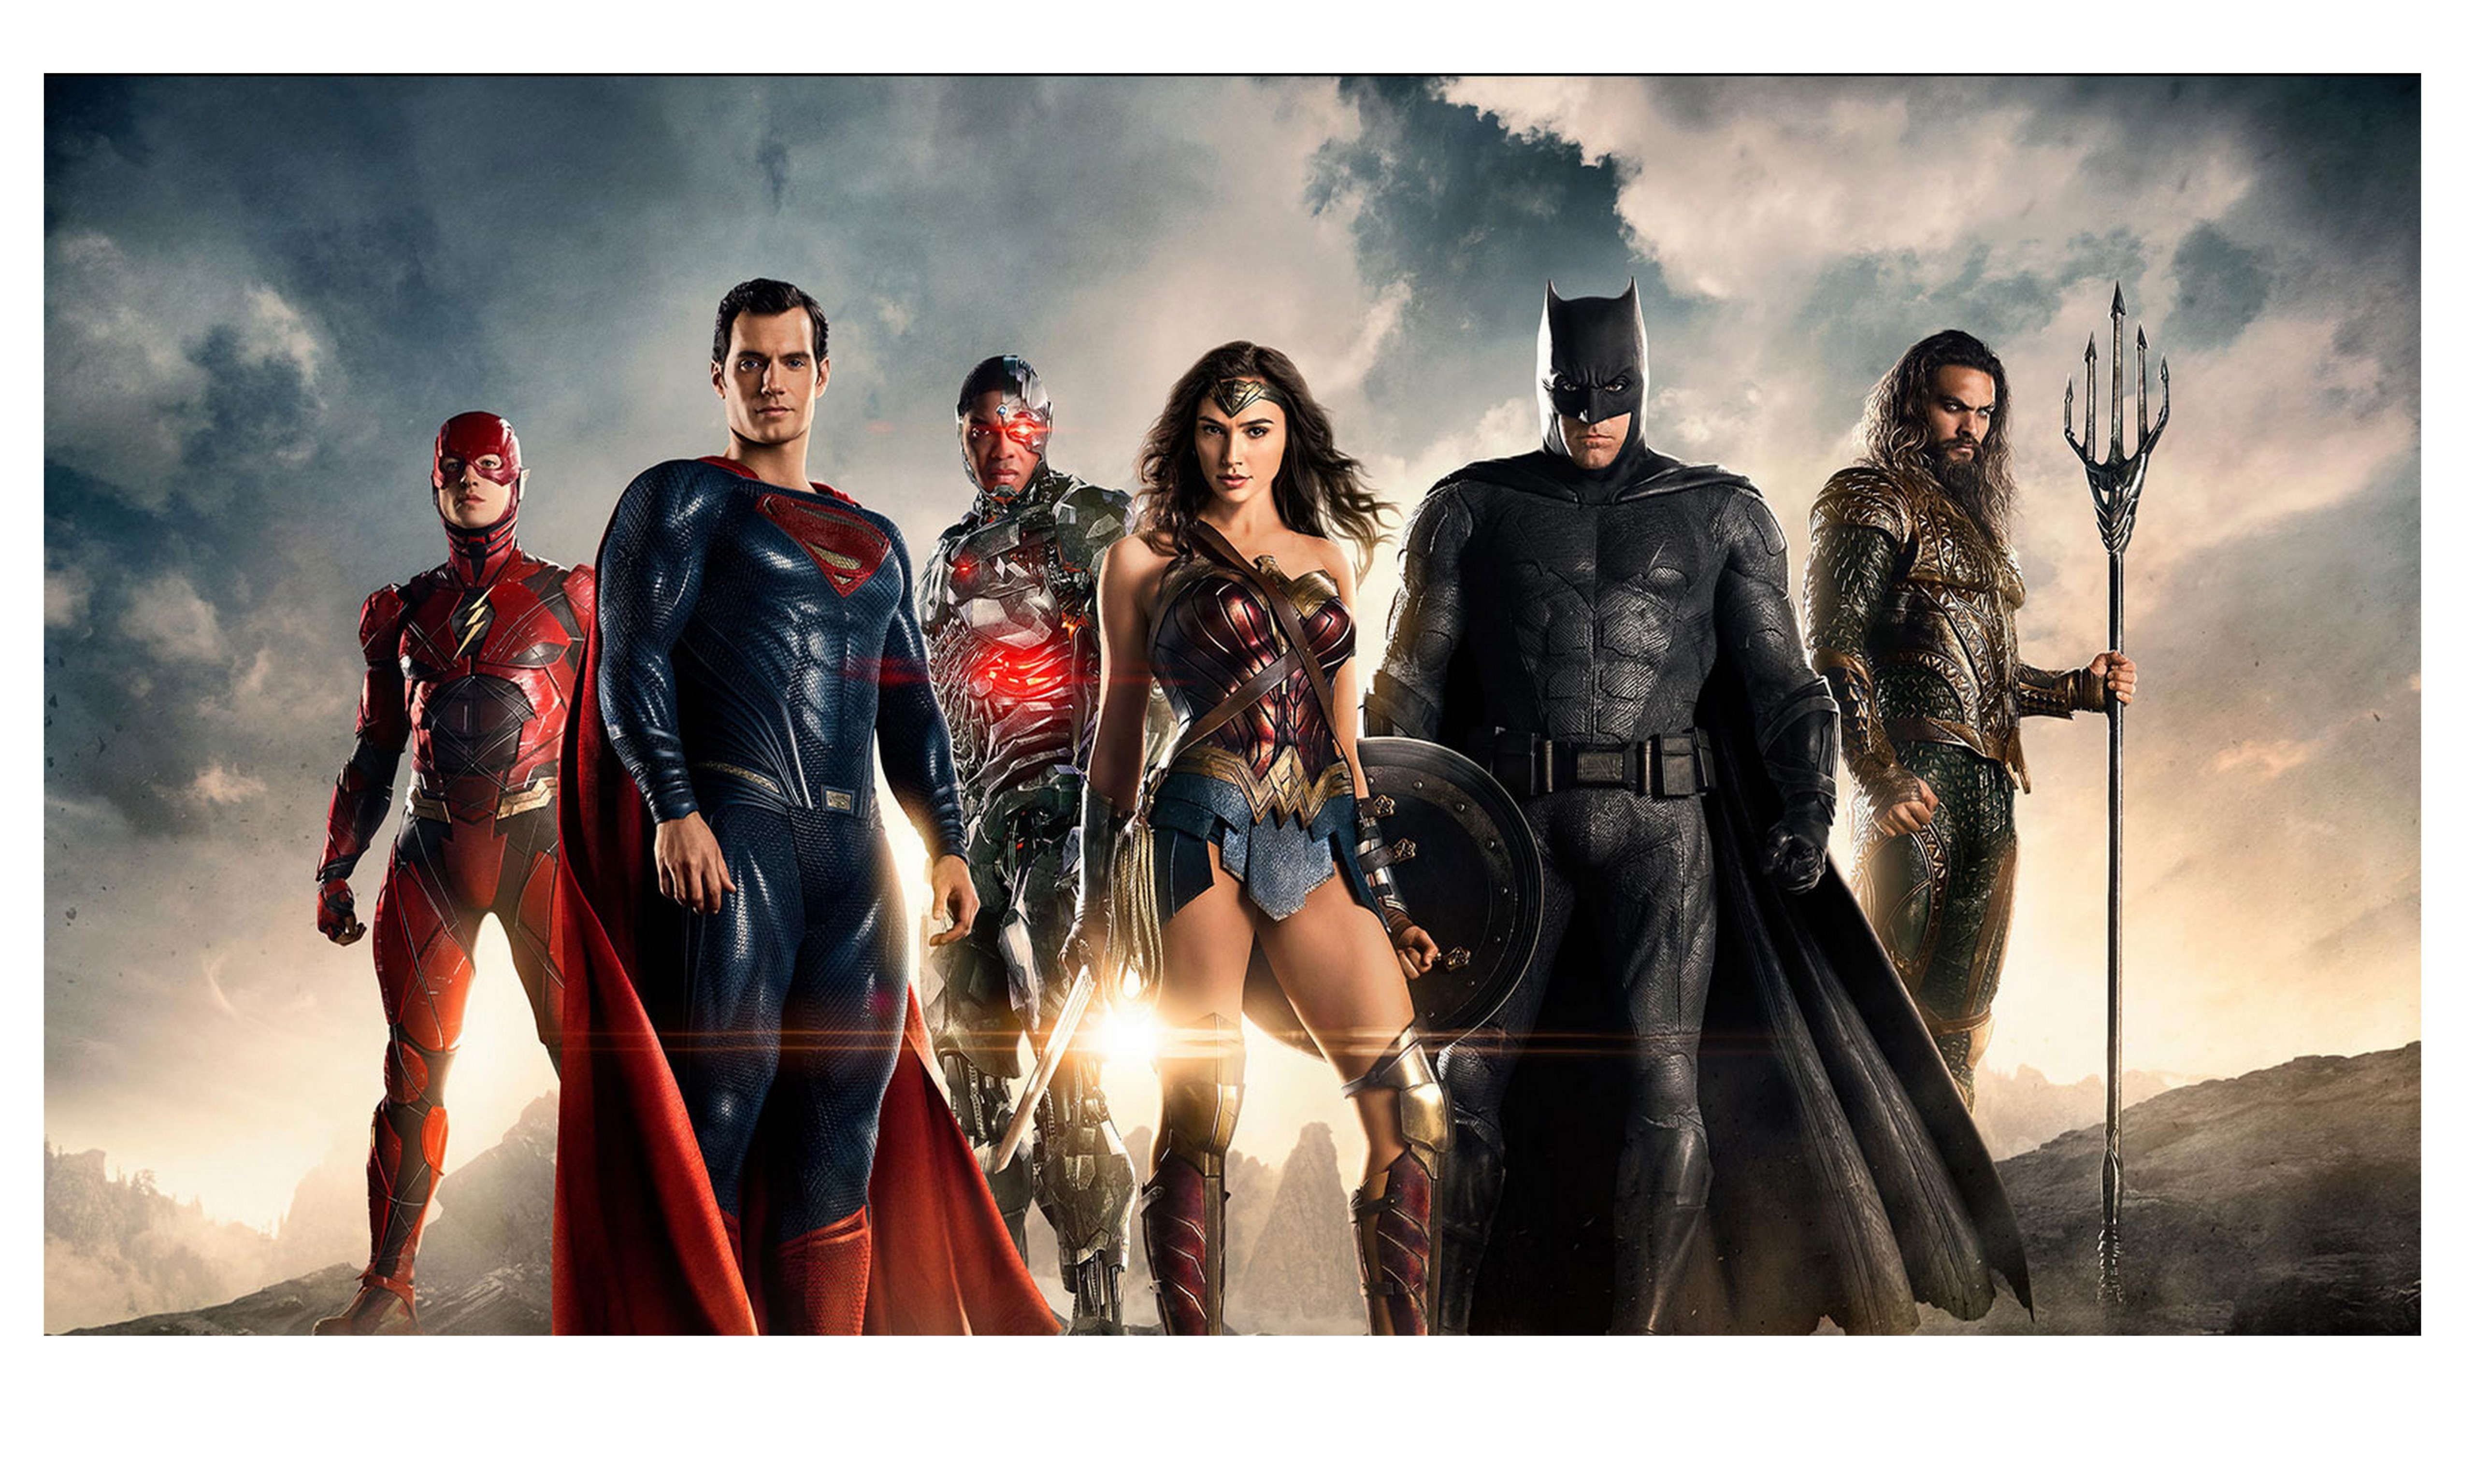 Justice League beats new Hindi releases at box office!